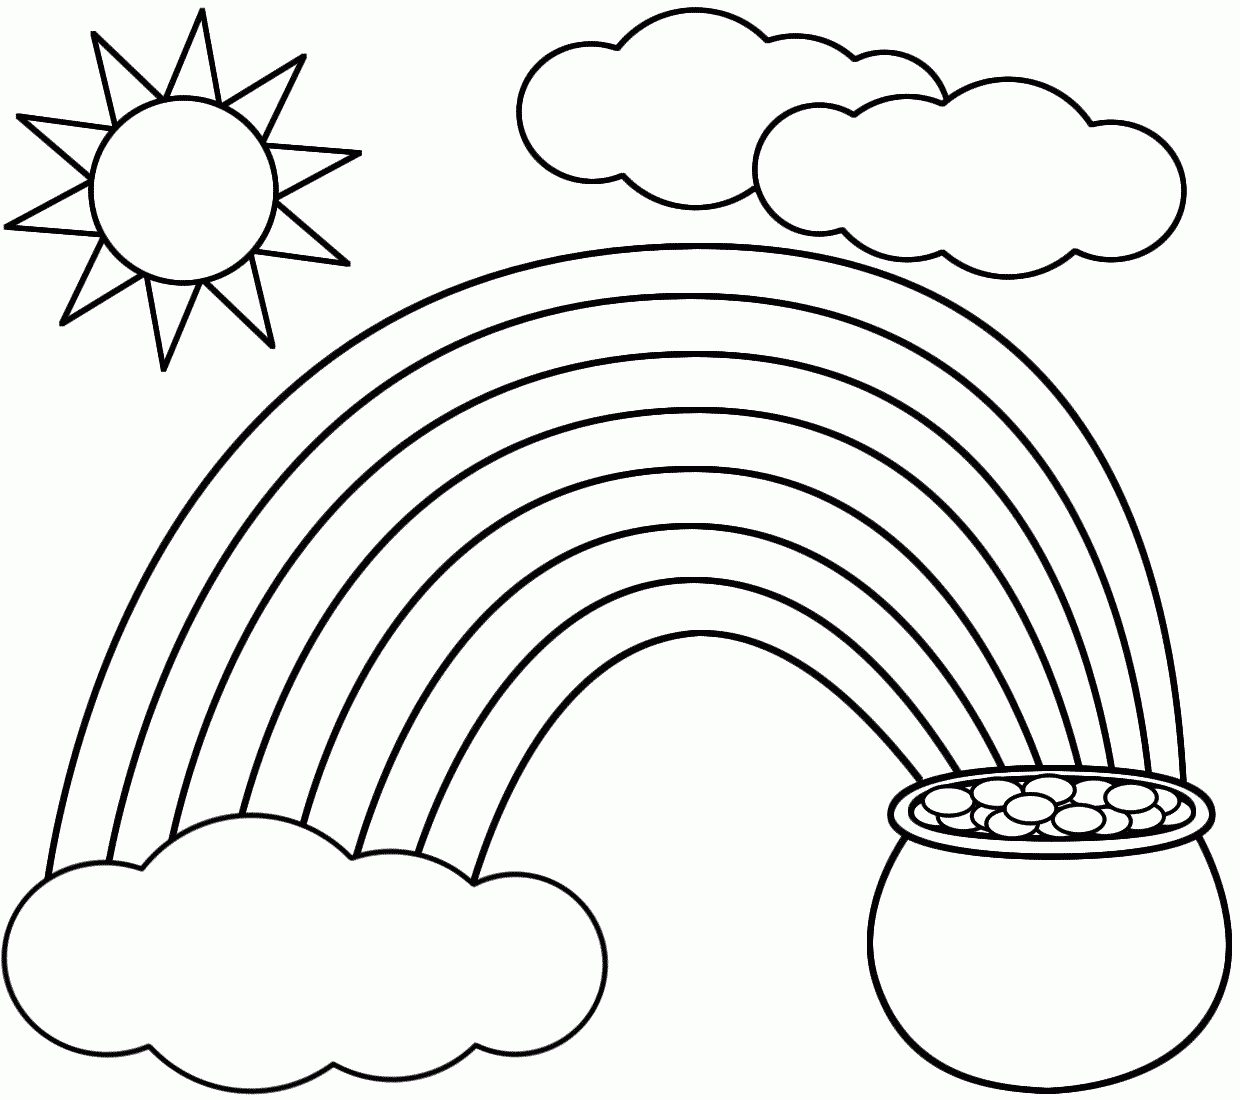 Rainbow Coloring Page ~ Kids Dream Of Rainbows With Pots Of Gold At - Free Printable Saint Patrick Coloring Pages